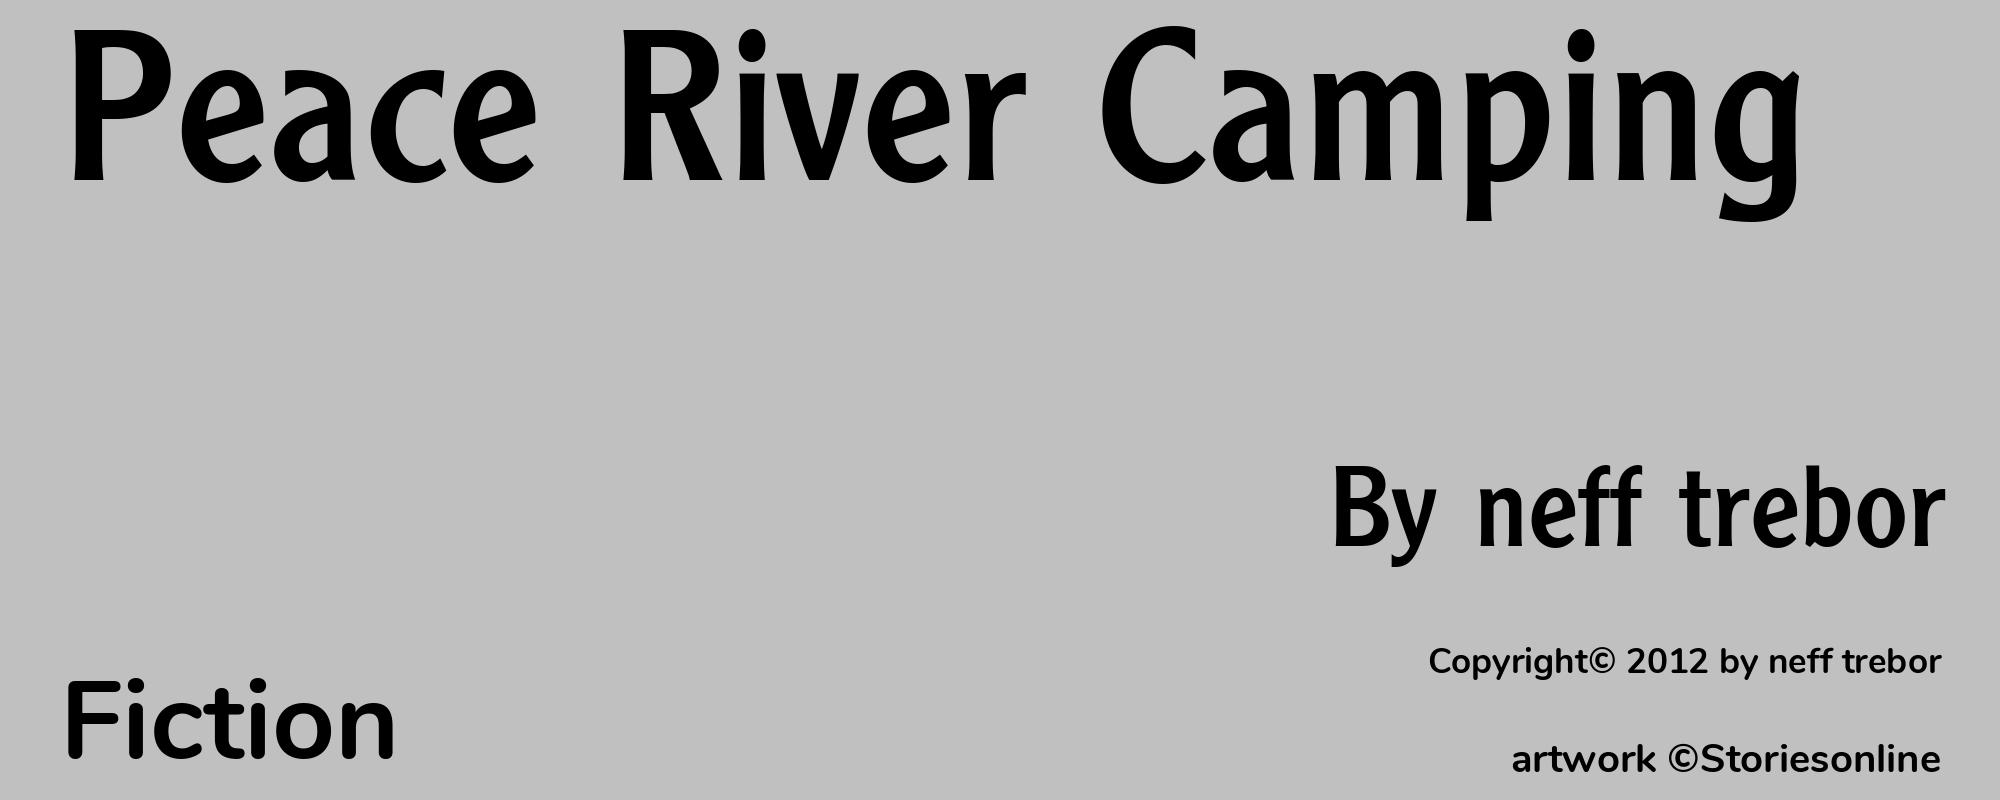 Peace River Camping - Cover